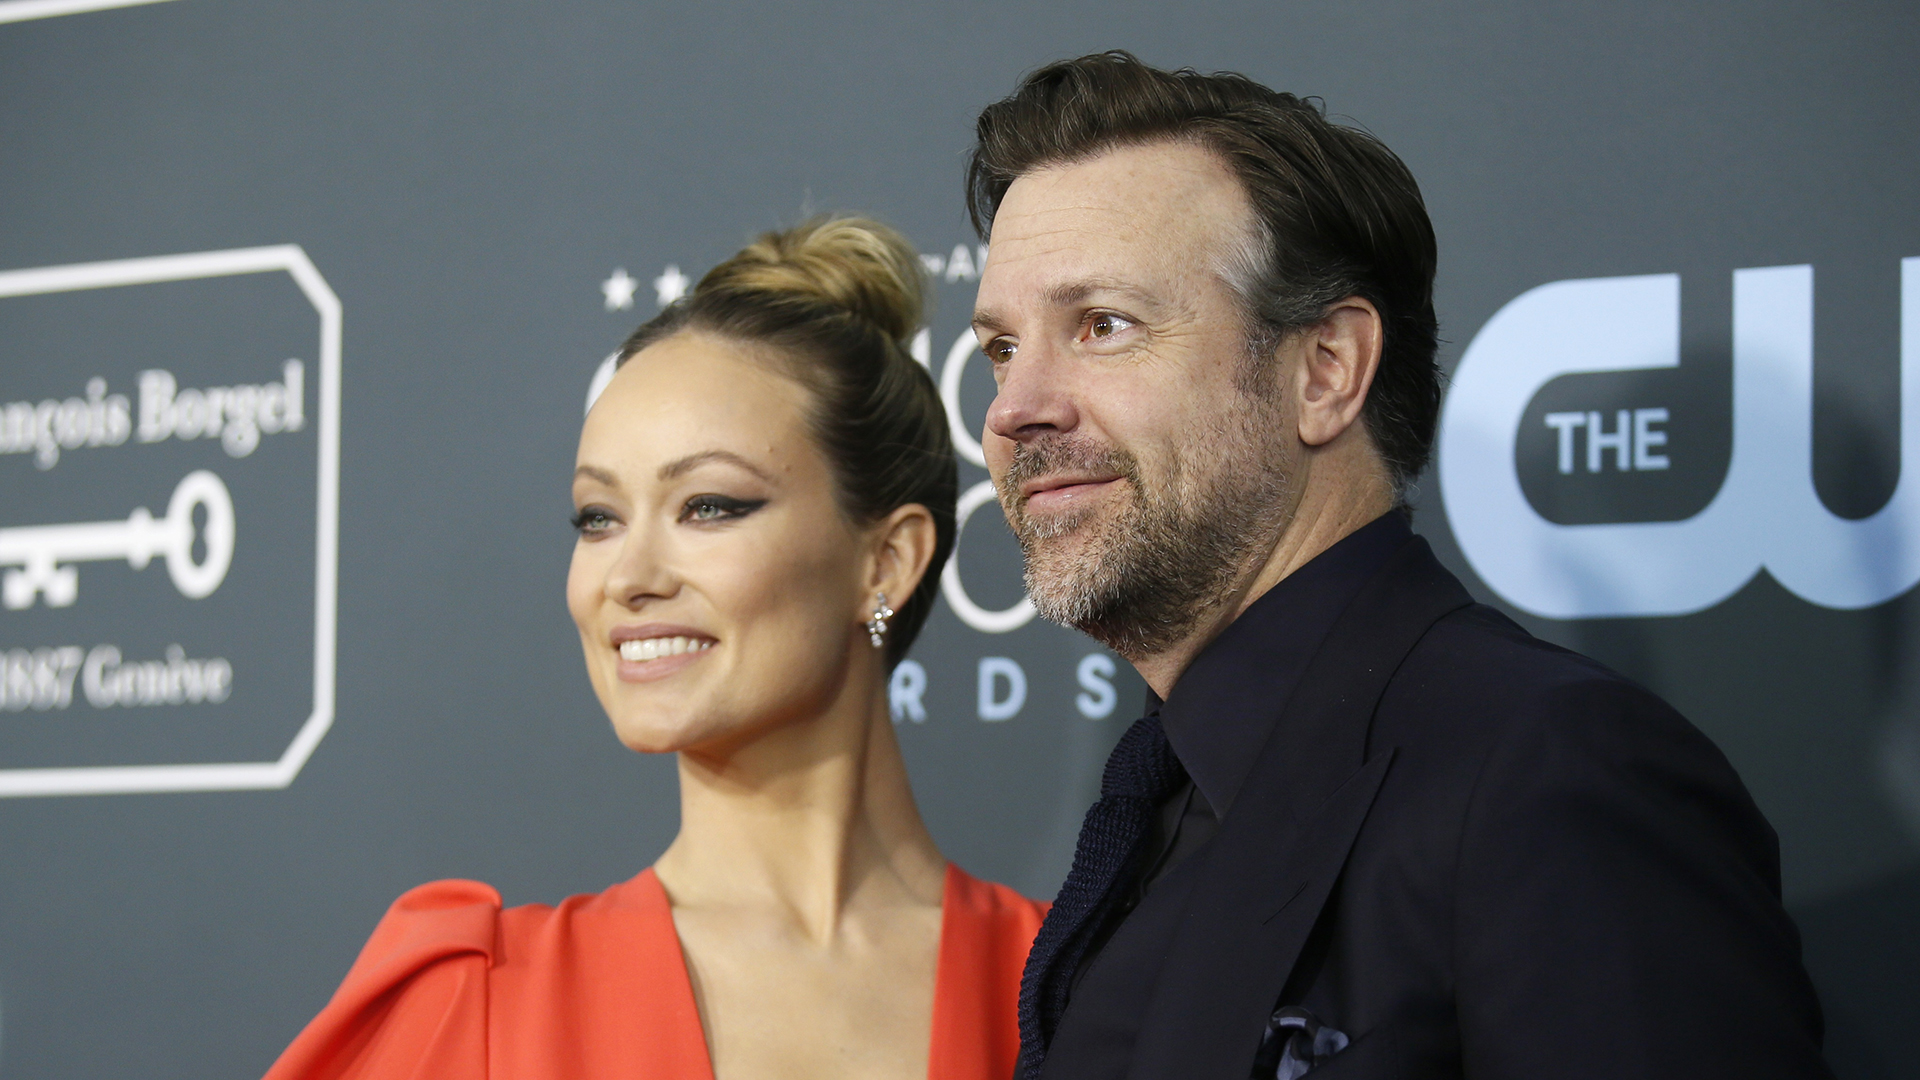 The nanny of Jason Sudeikis and Olivia Wilde told how the actor discovered that the actress was unfaithful to him with Harry Styles (Reuters)